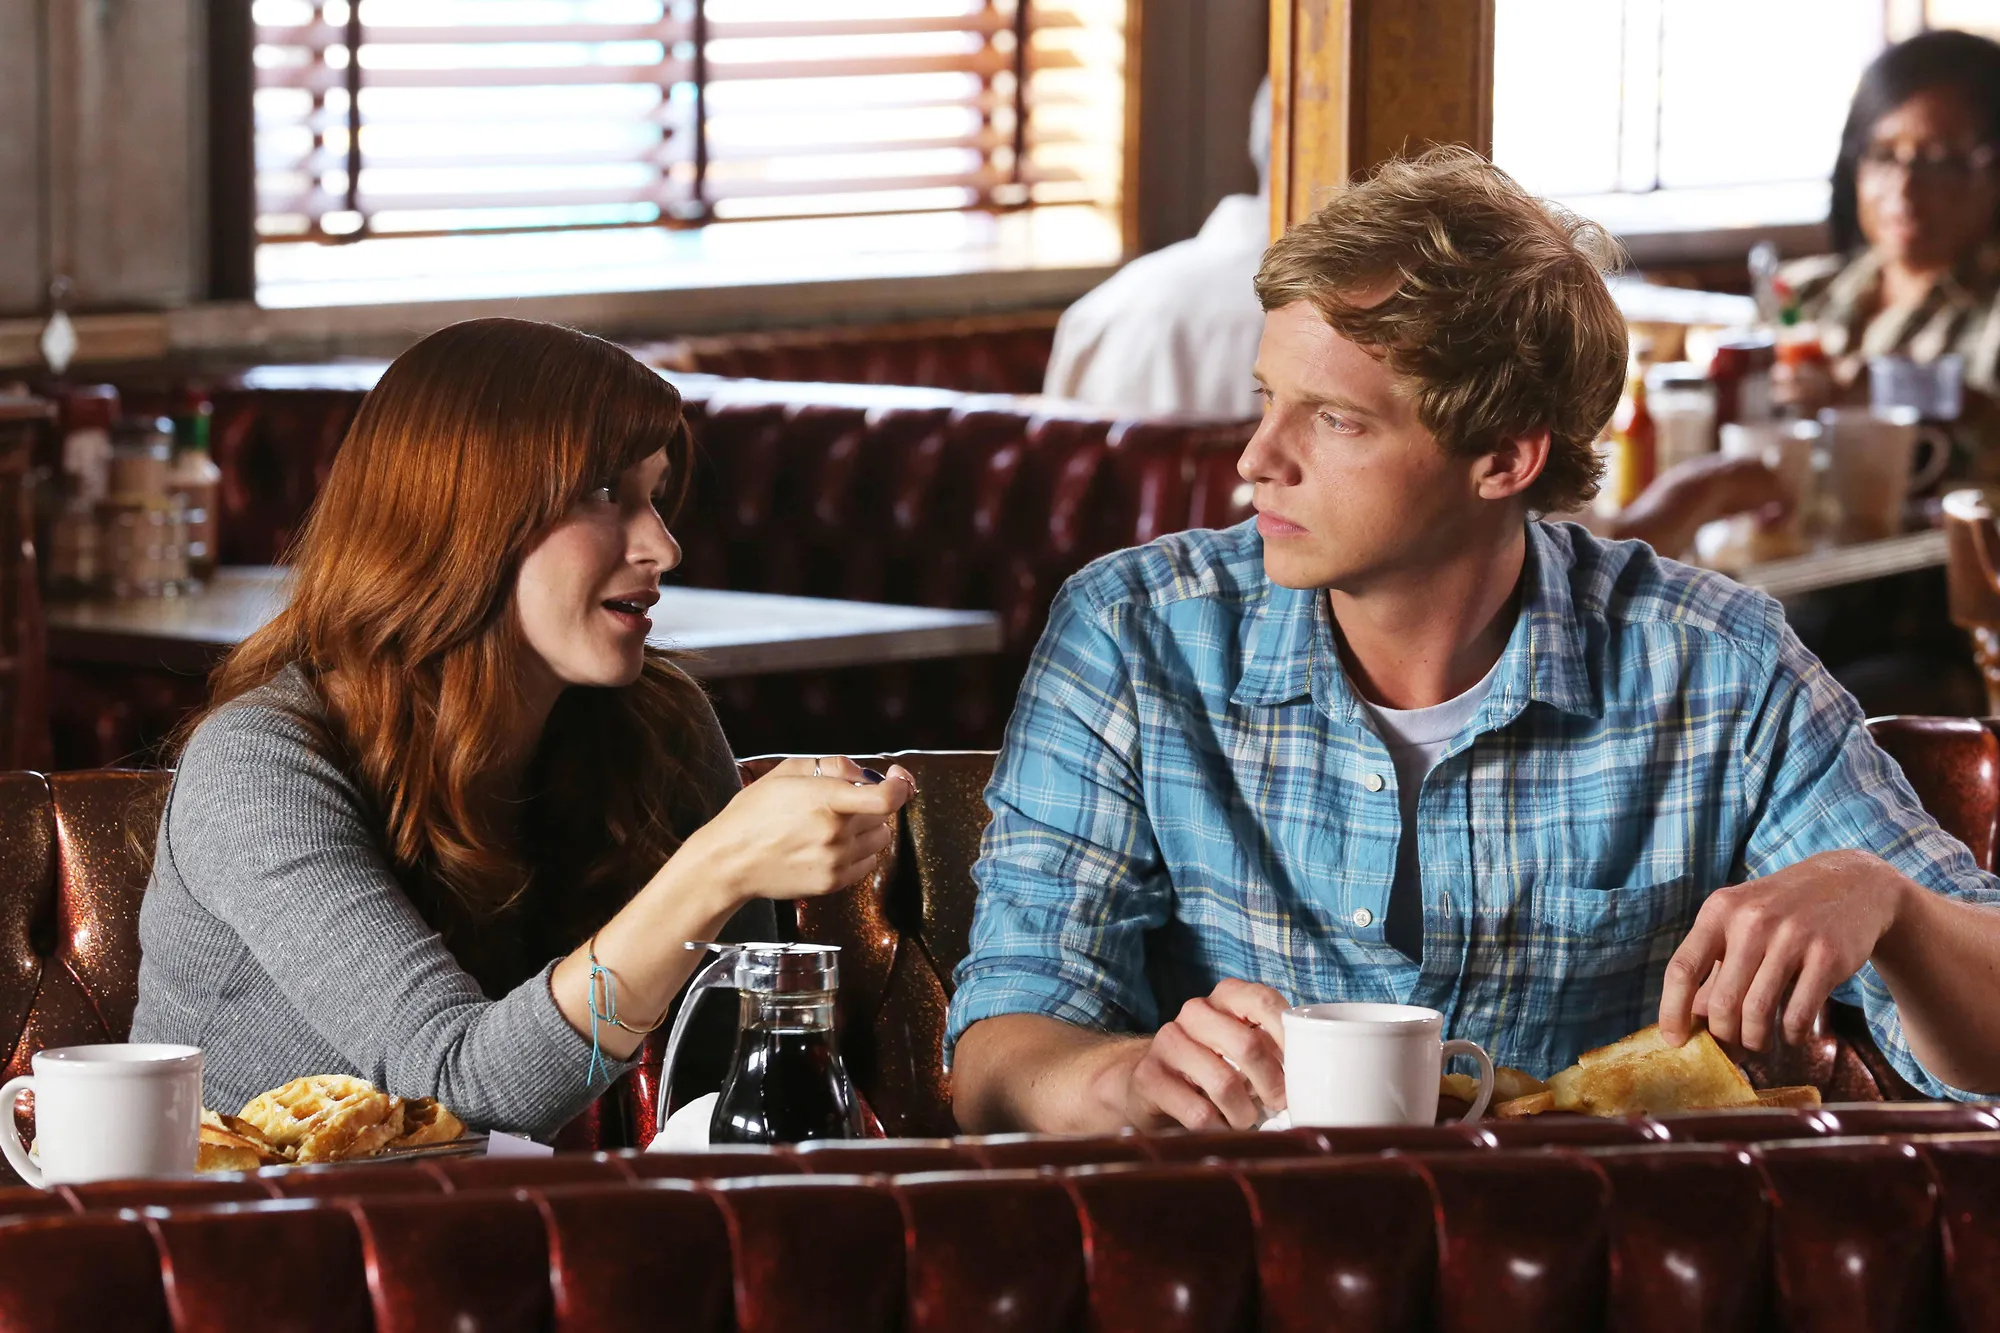 Aya Cash: Gretchen Cutler and Chris Geere as Jimmy Shive-Overly, You're the Worst. 2000x1340 HD Background.